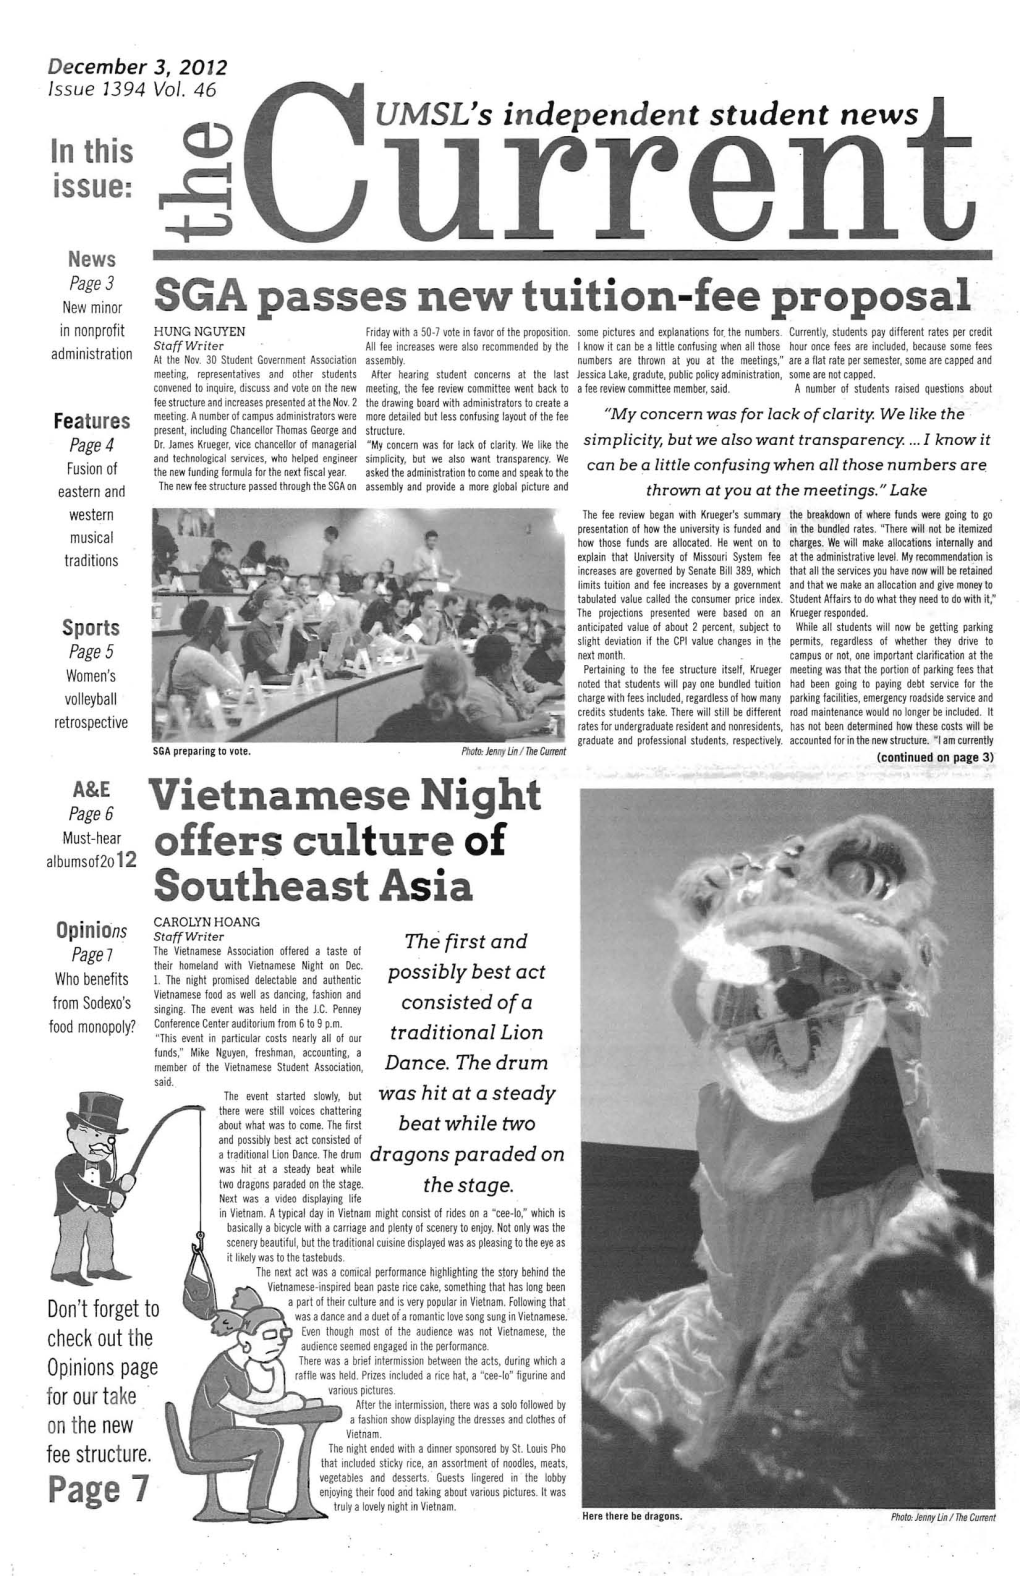 SGA Passes New Tuition-Fee Proposal Vietnamese Night Offers C Iture of Southeast Asia